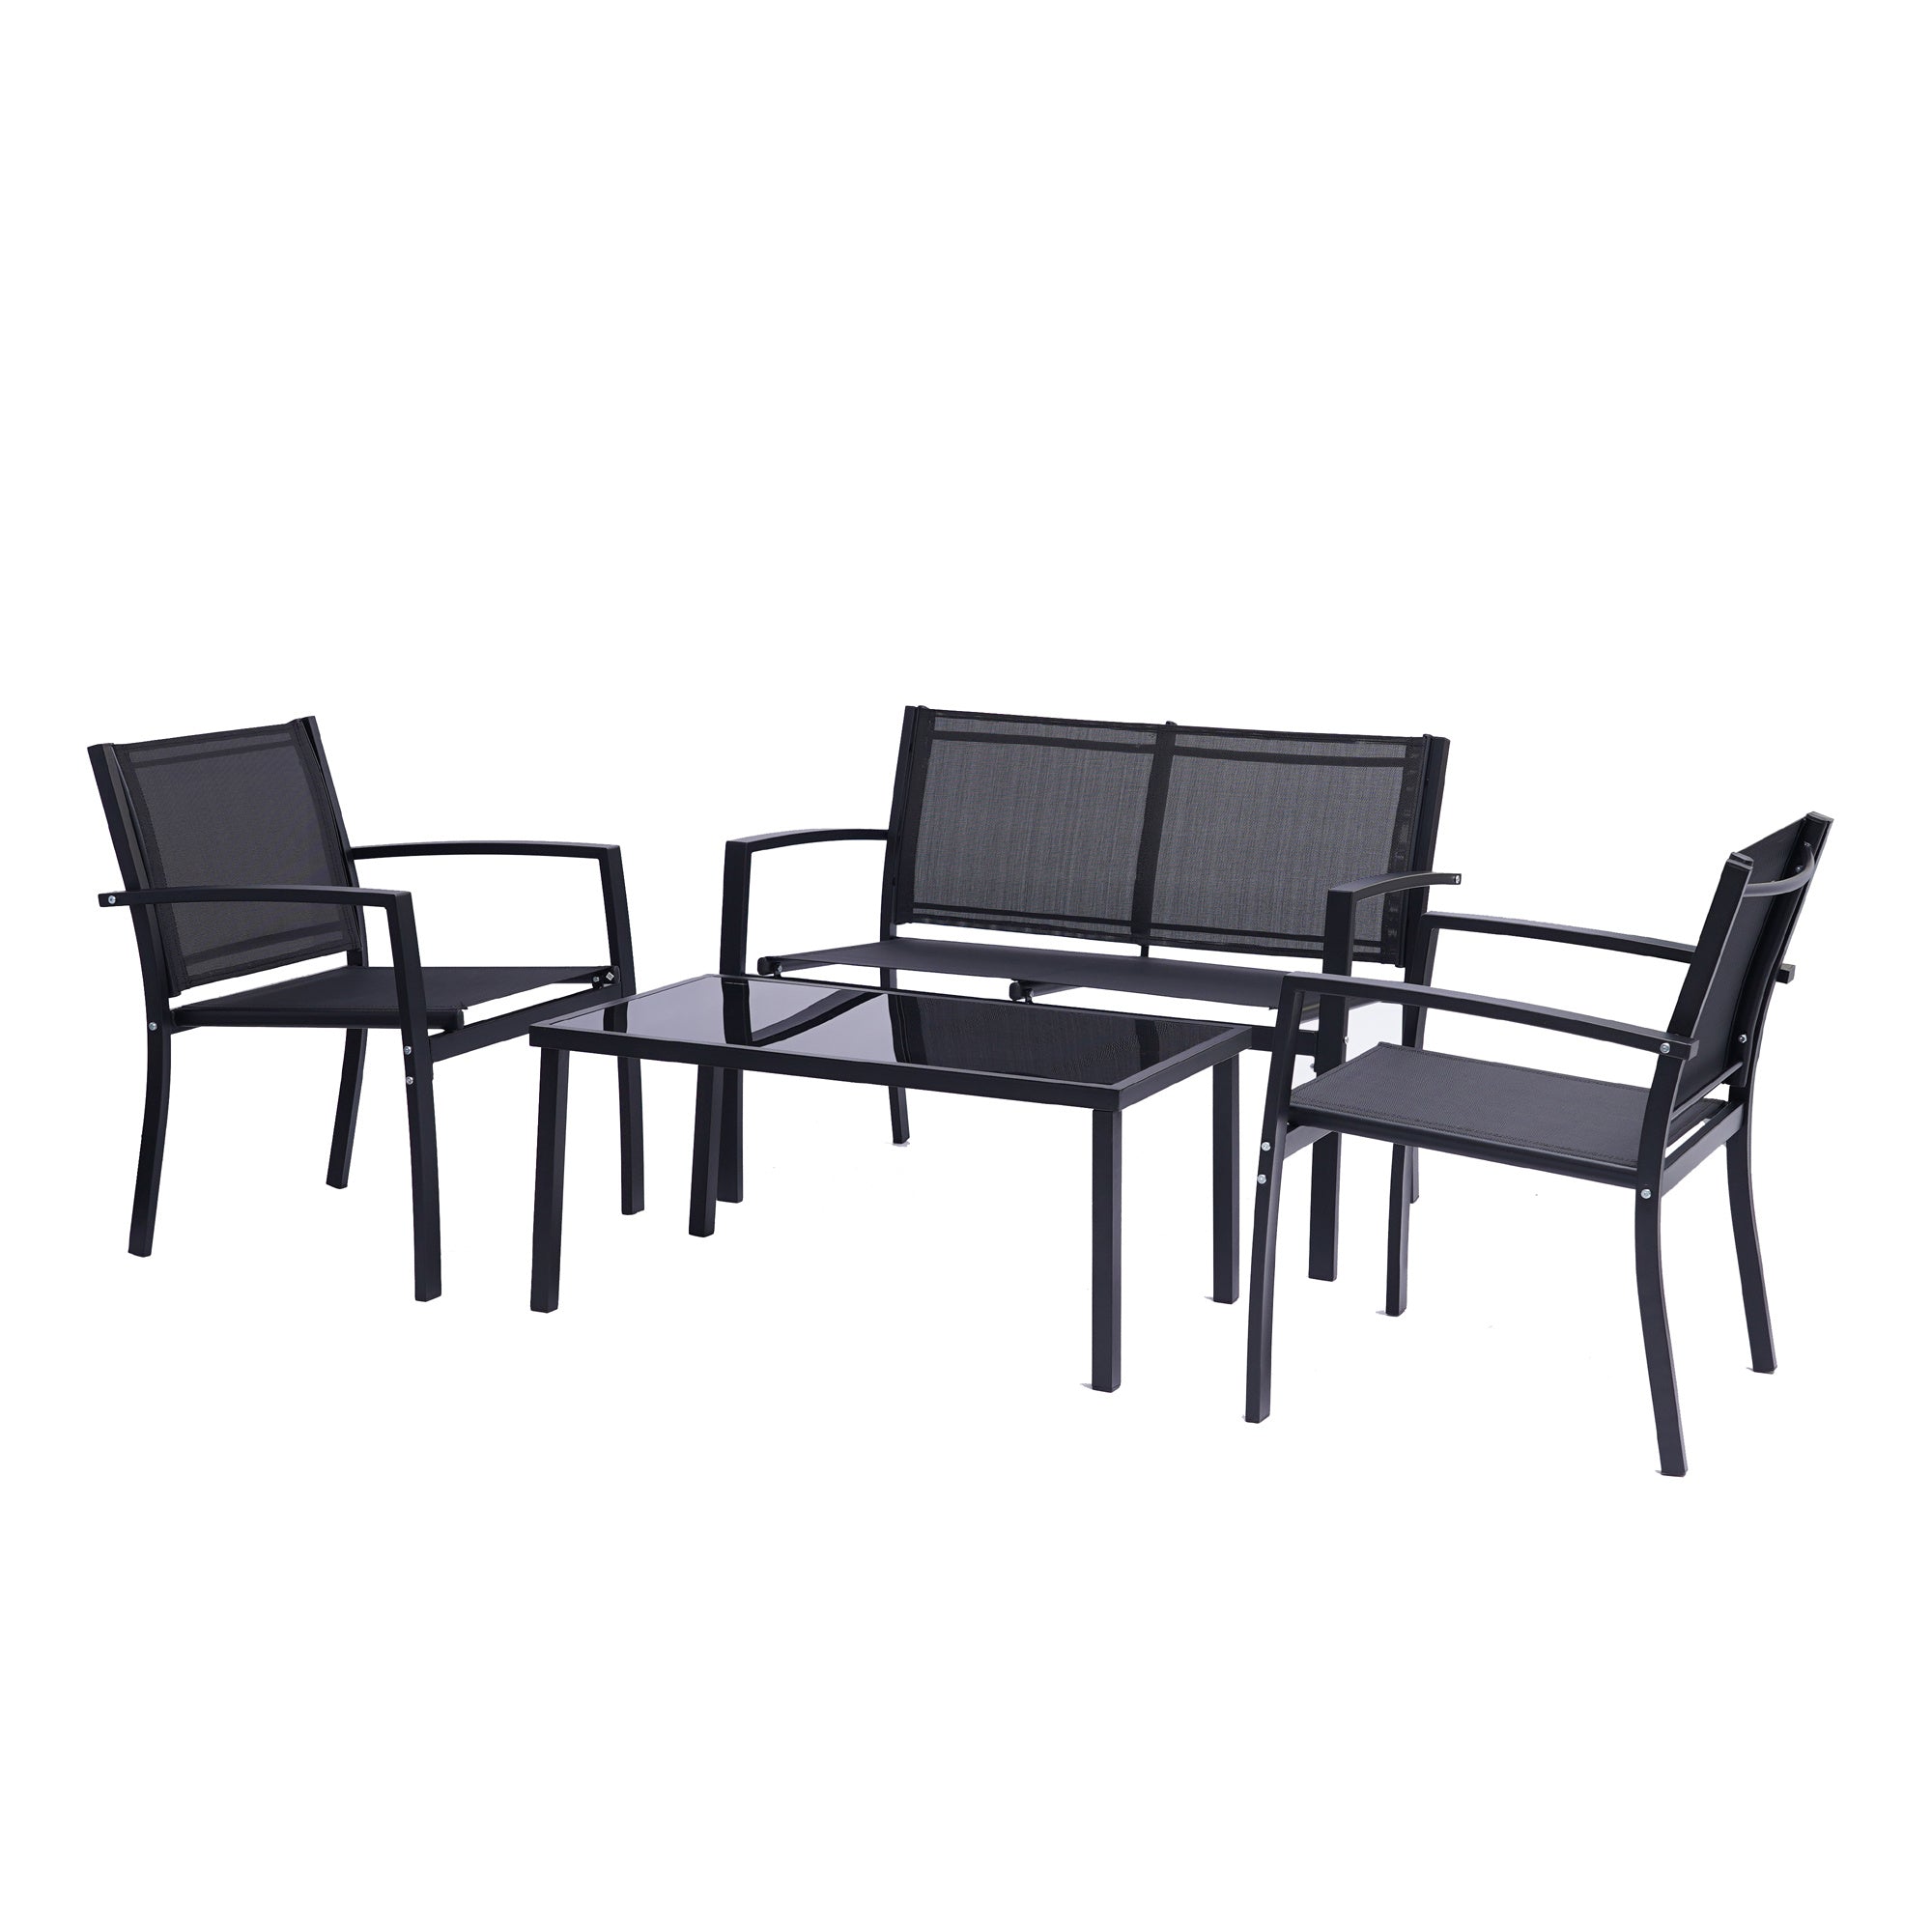 A 4 Pieces Patio Furniture Set Outdoor Garden Patio Conversation Sets Poolside Lawn Chairs with Glass Coffee Table Porch Furniture (Black) with a view of the ocean.